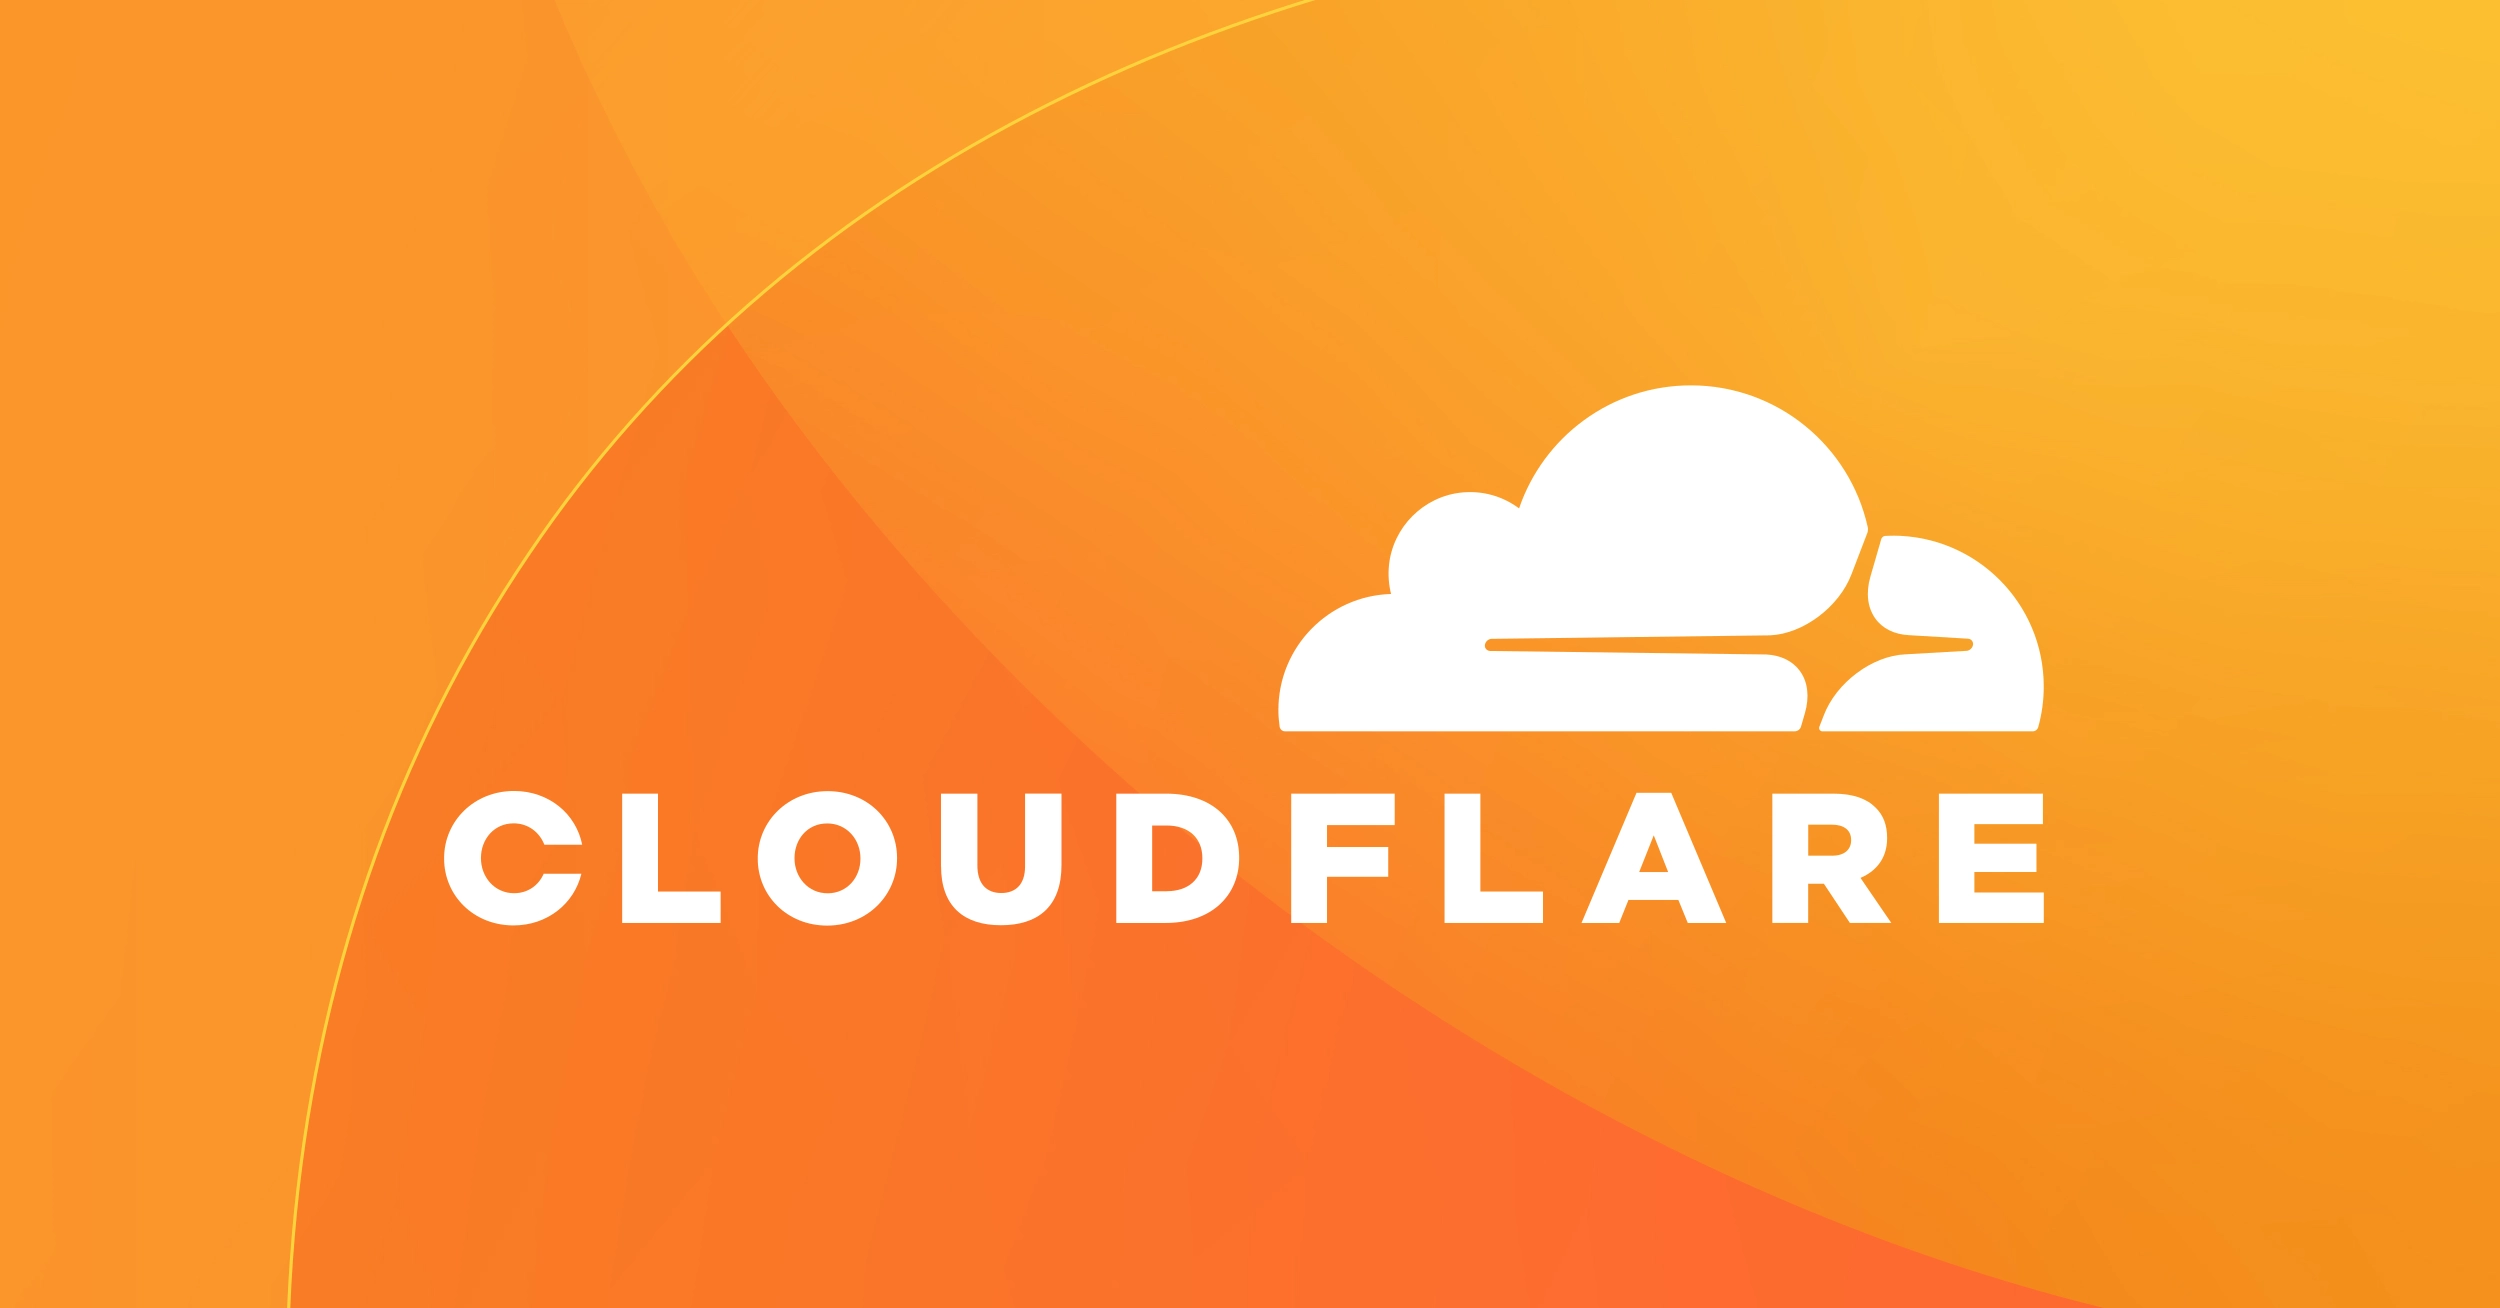 Open Graph image example by Cloudflare